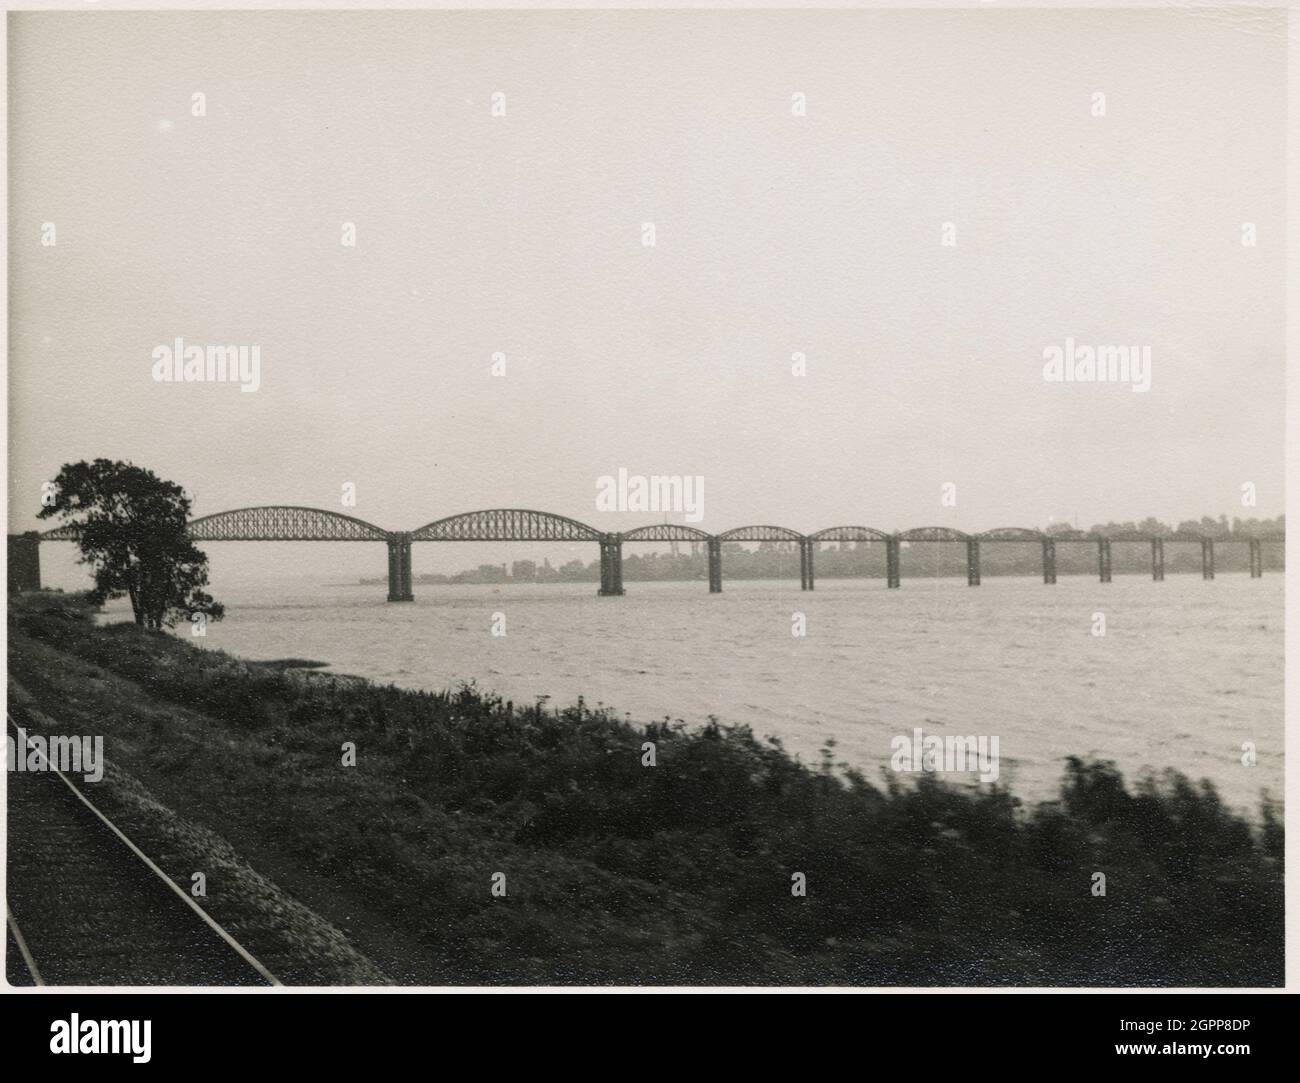 Severn Bridge, Lydney, Forest of Dean, Gloucestershire, 1951. The Severn Bridge, viewed from the South Wales Railway on the west bank of the River Severn. The Severn Bridge was opened in 1879, and carried the Severn and Wye Railway across the River Severn. In 1960, two barges collided with a bridge pier, and two spans collapsed. In 1961, during repair work, a similar collision occurred and it was deemed uneconomical to repair the bridge. It was demolished in the late 1960s. Following the opening of the Severn Road Bridge in 1966, the Severn Bridge is often referred to as the Severn Railway Bri Stock Photo